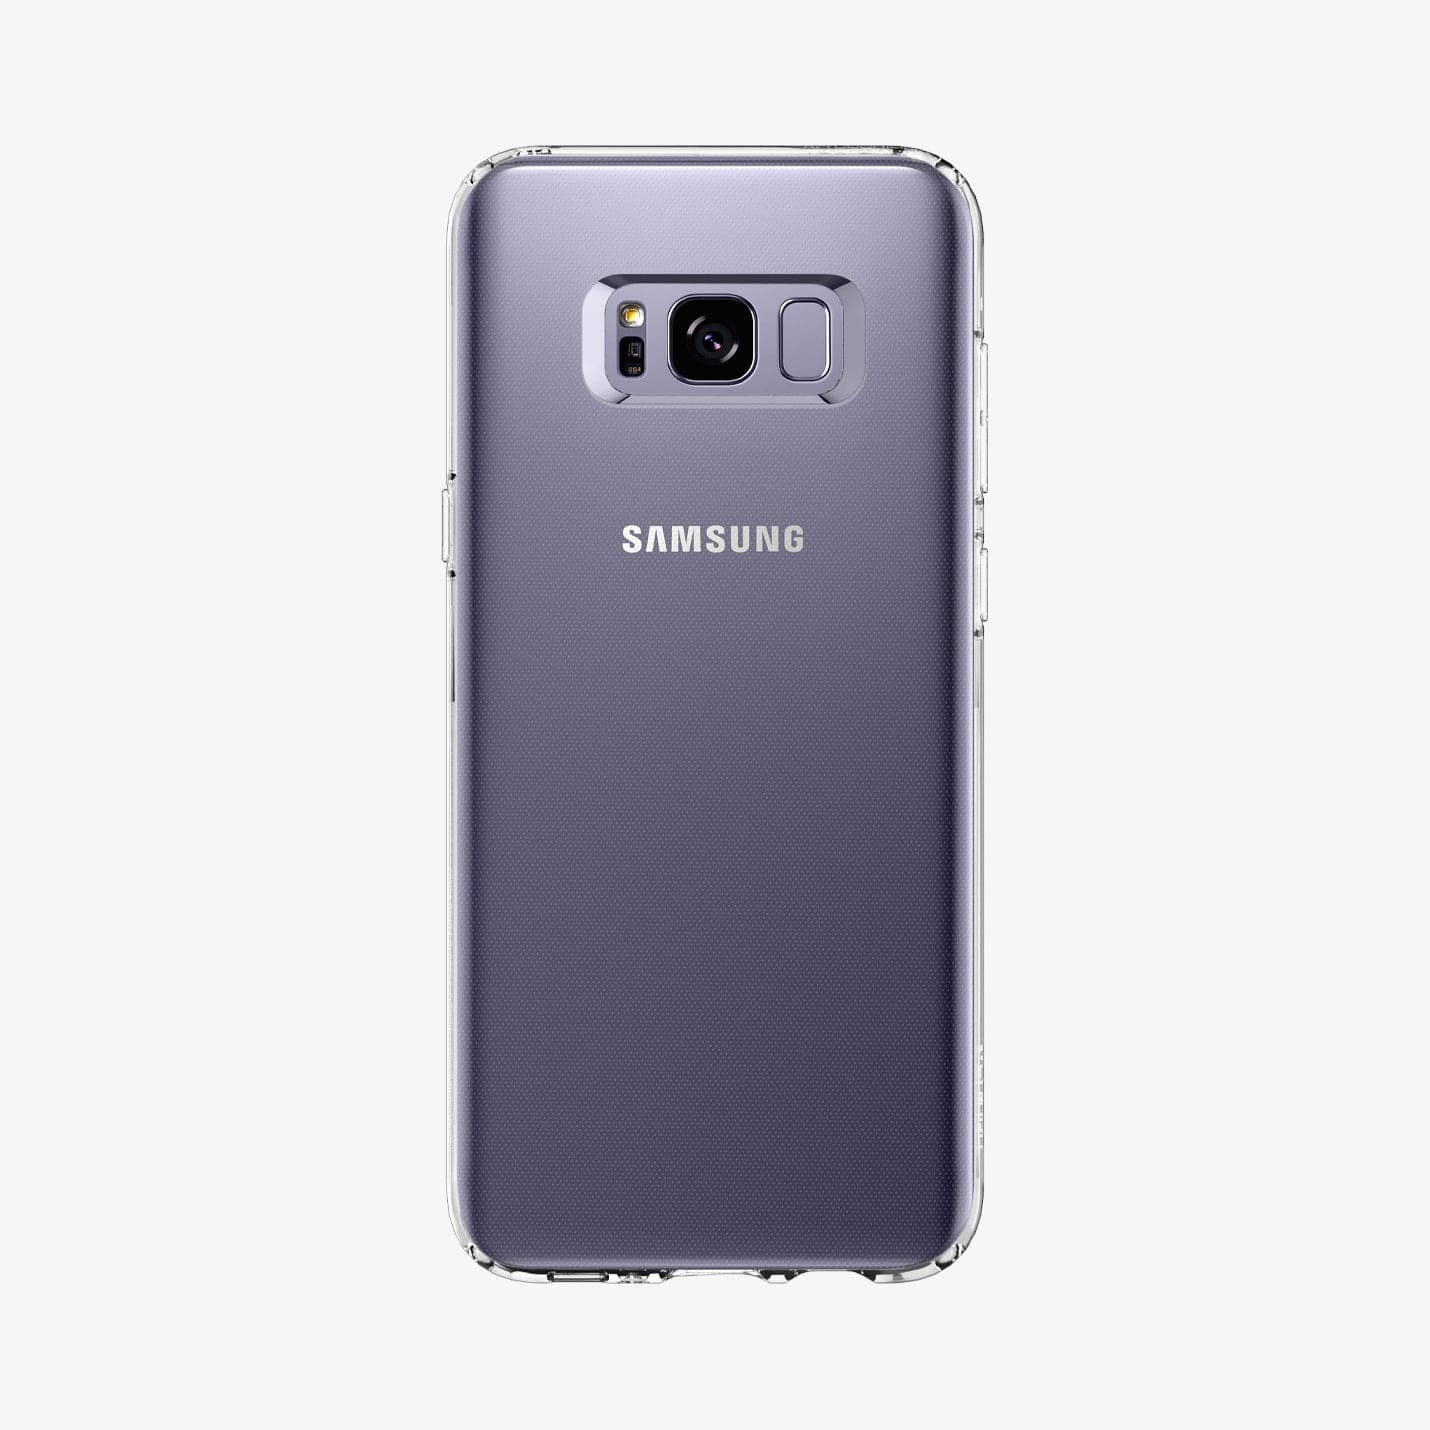 565CS21612 - Galaxy S8 Series Liquid Crystal Case in crystal clear showing the back